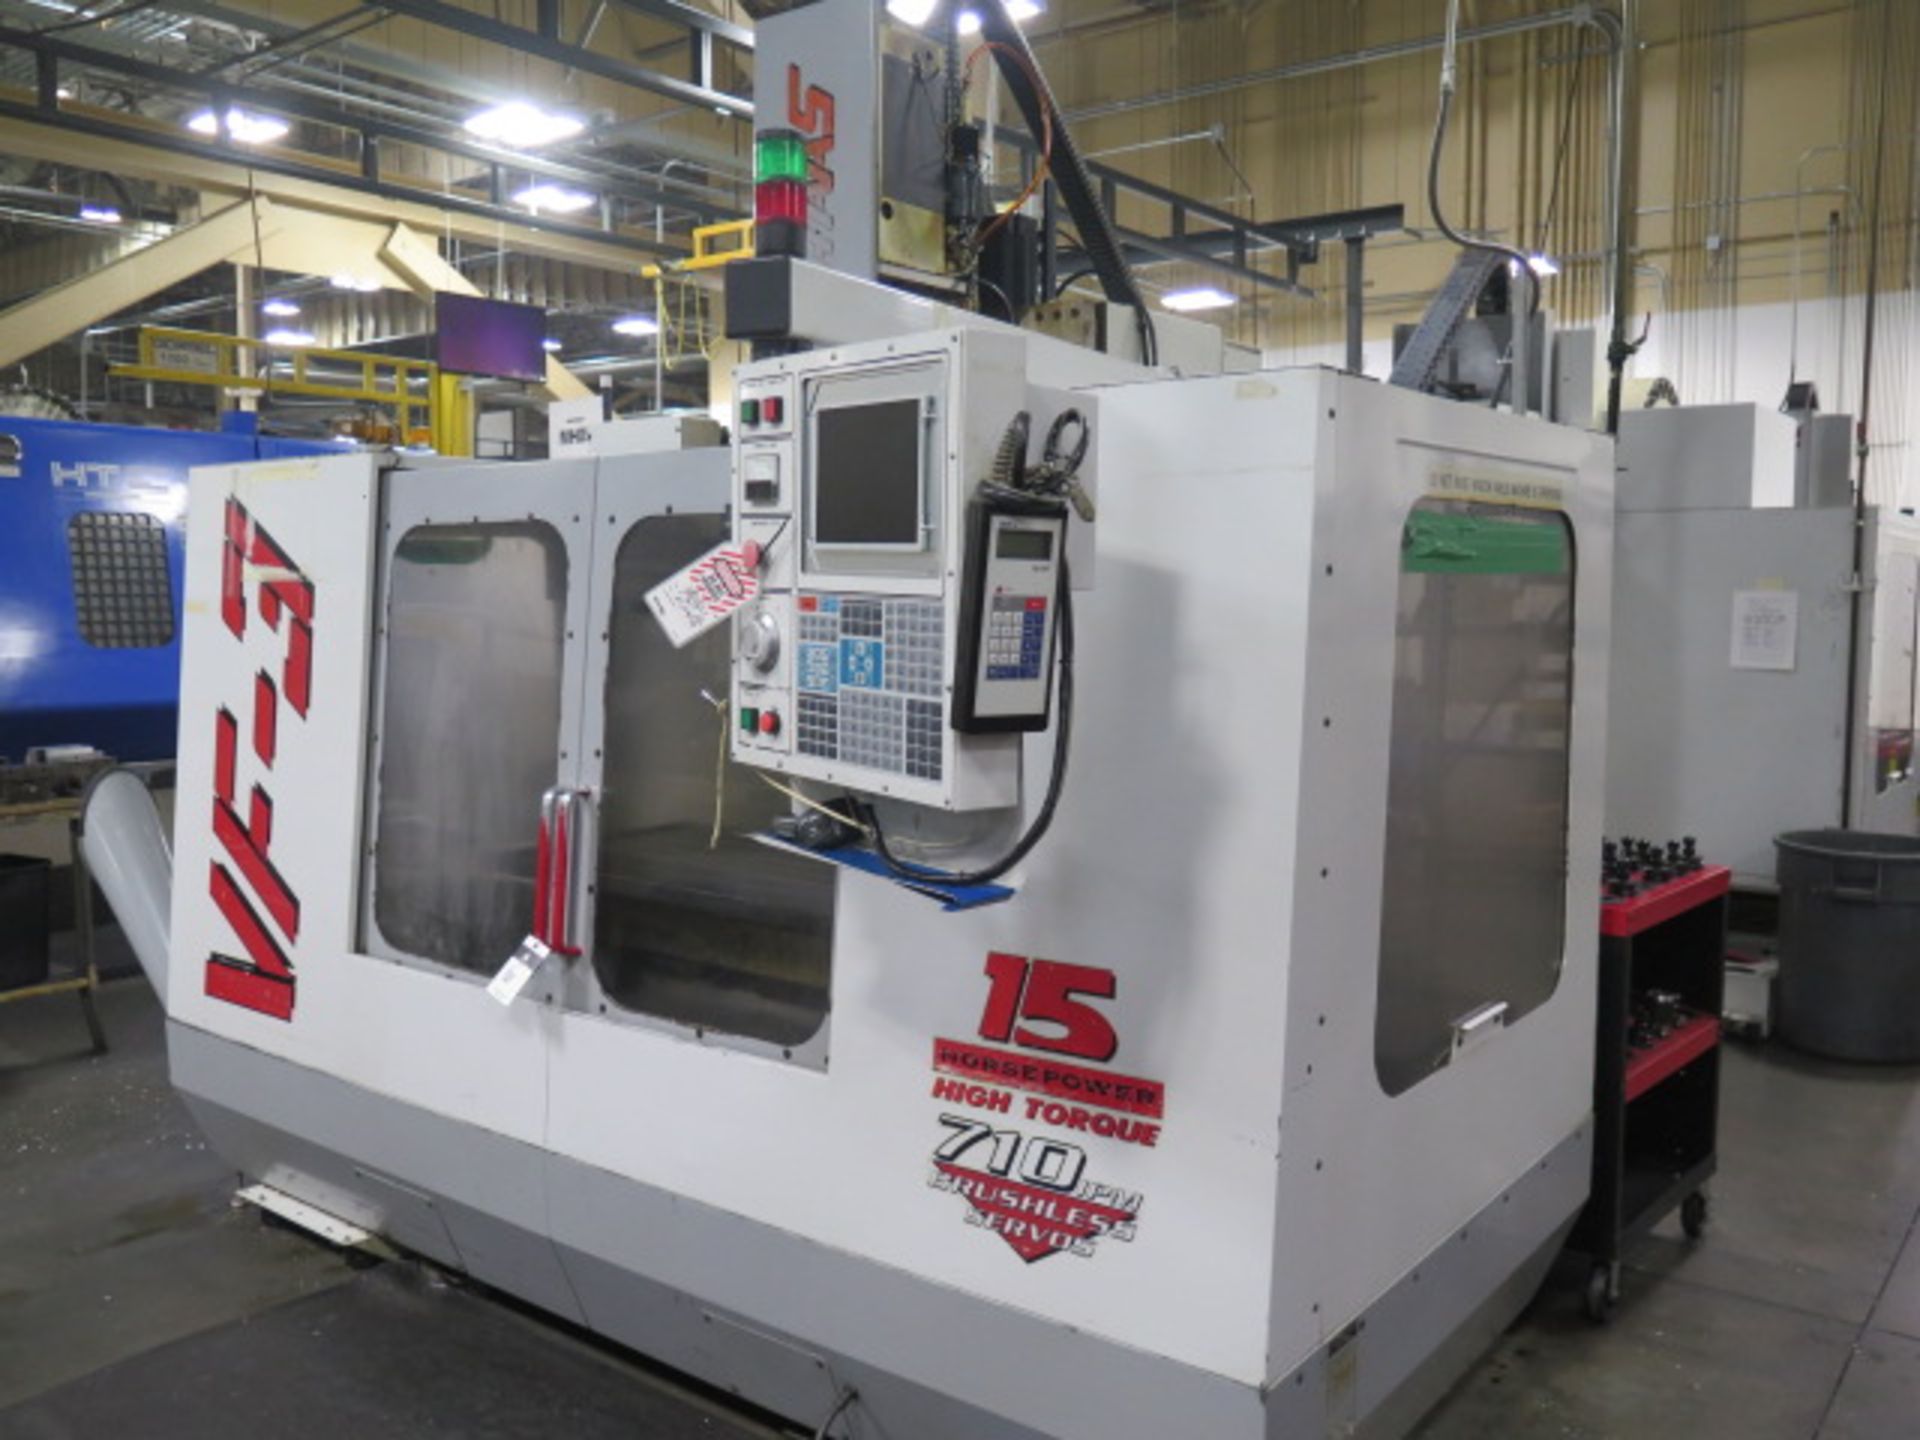 1997 Haas VF-3 4-Axis CNC Vertical Machining Center s/n 10187 w/ Haas Controls, 20-Station ATC, BT- - Image 2 of 17